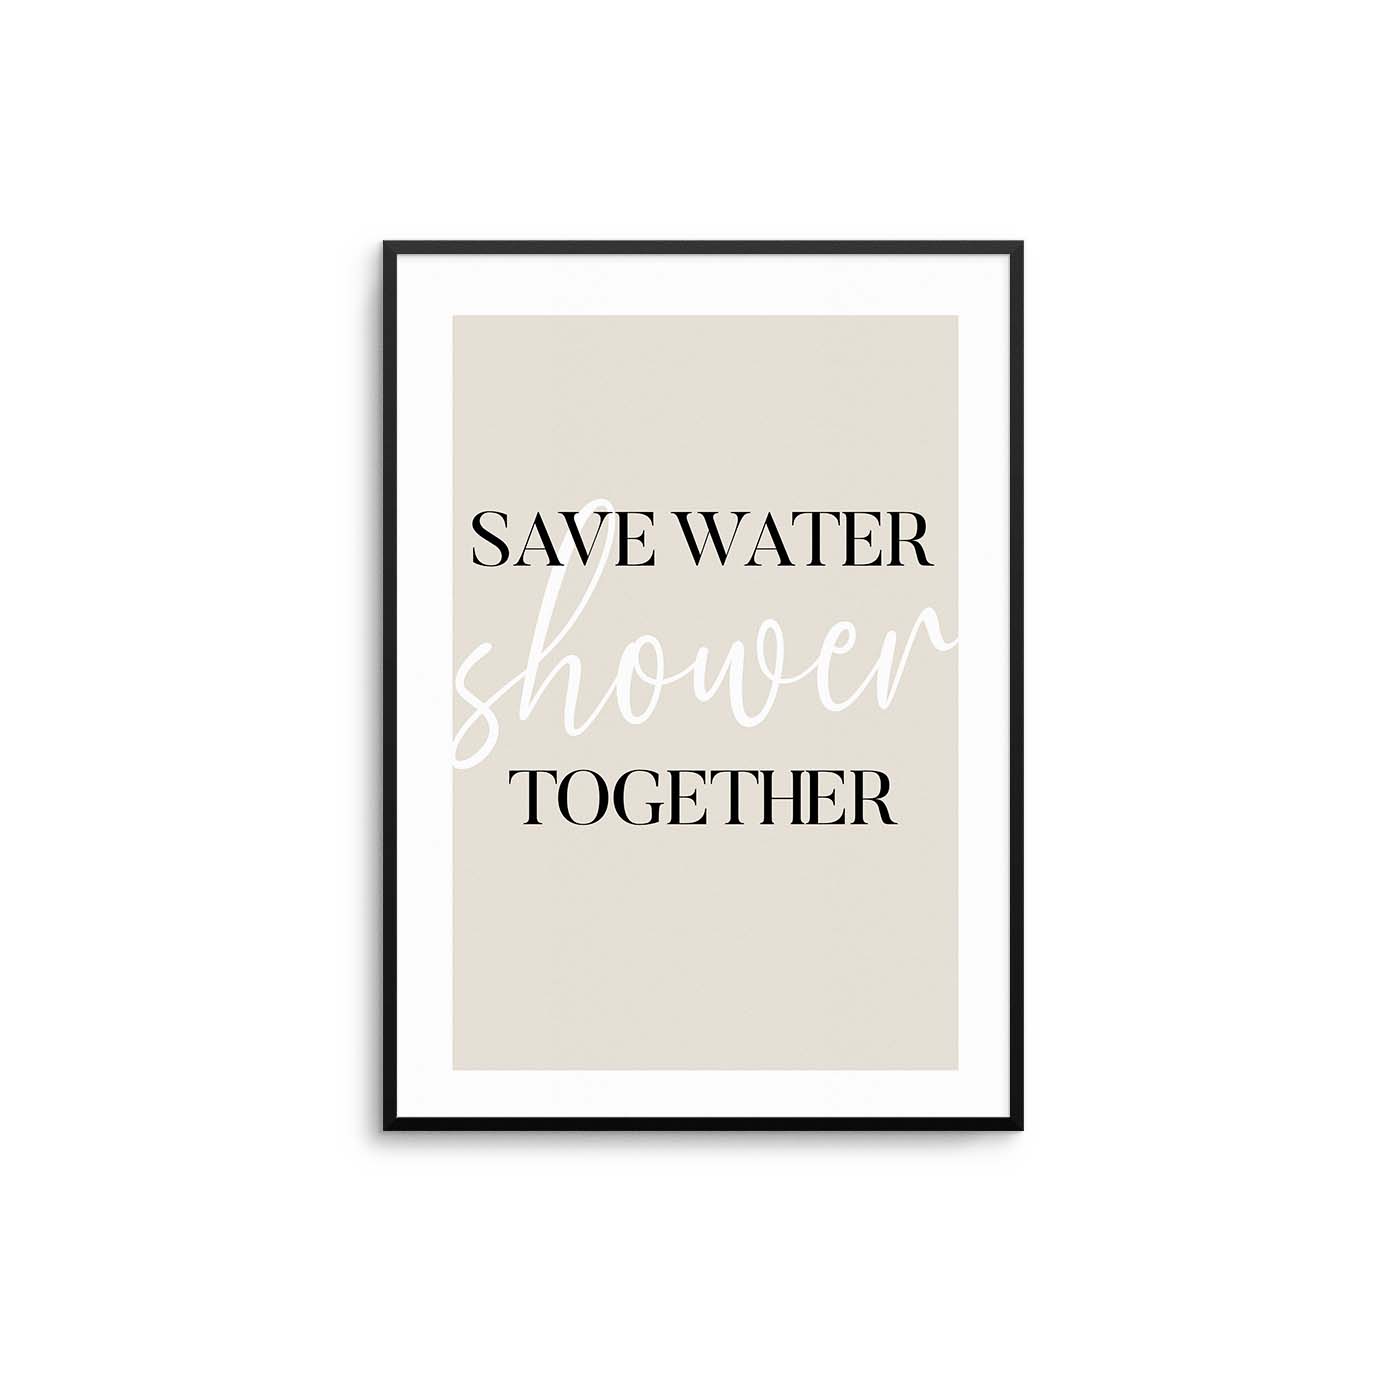 Save Water Shower Together Poster - D'Luxe Prints